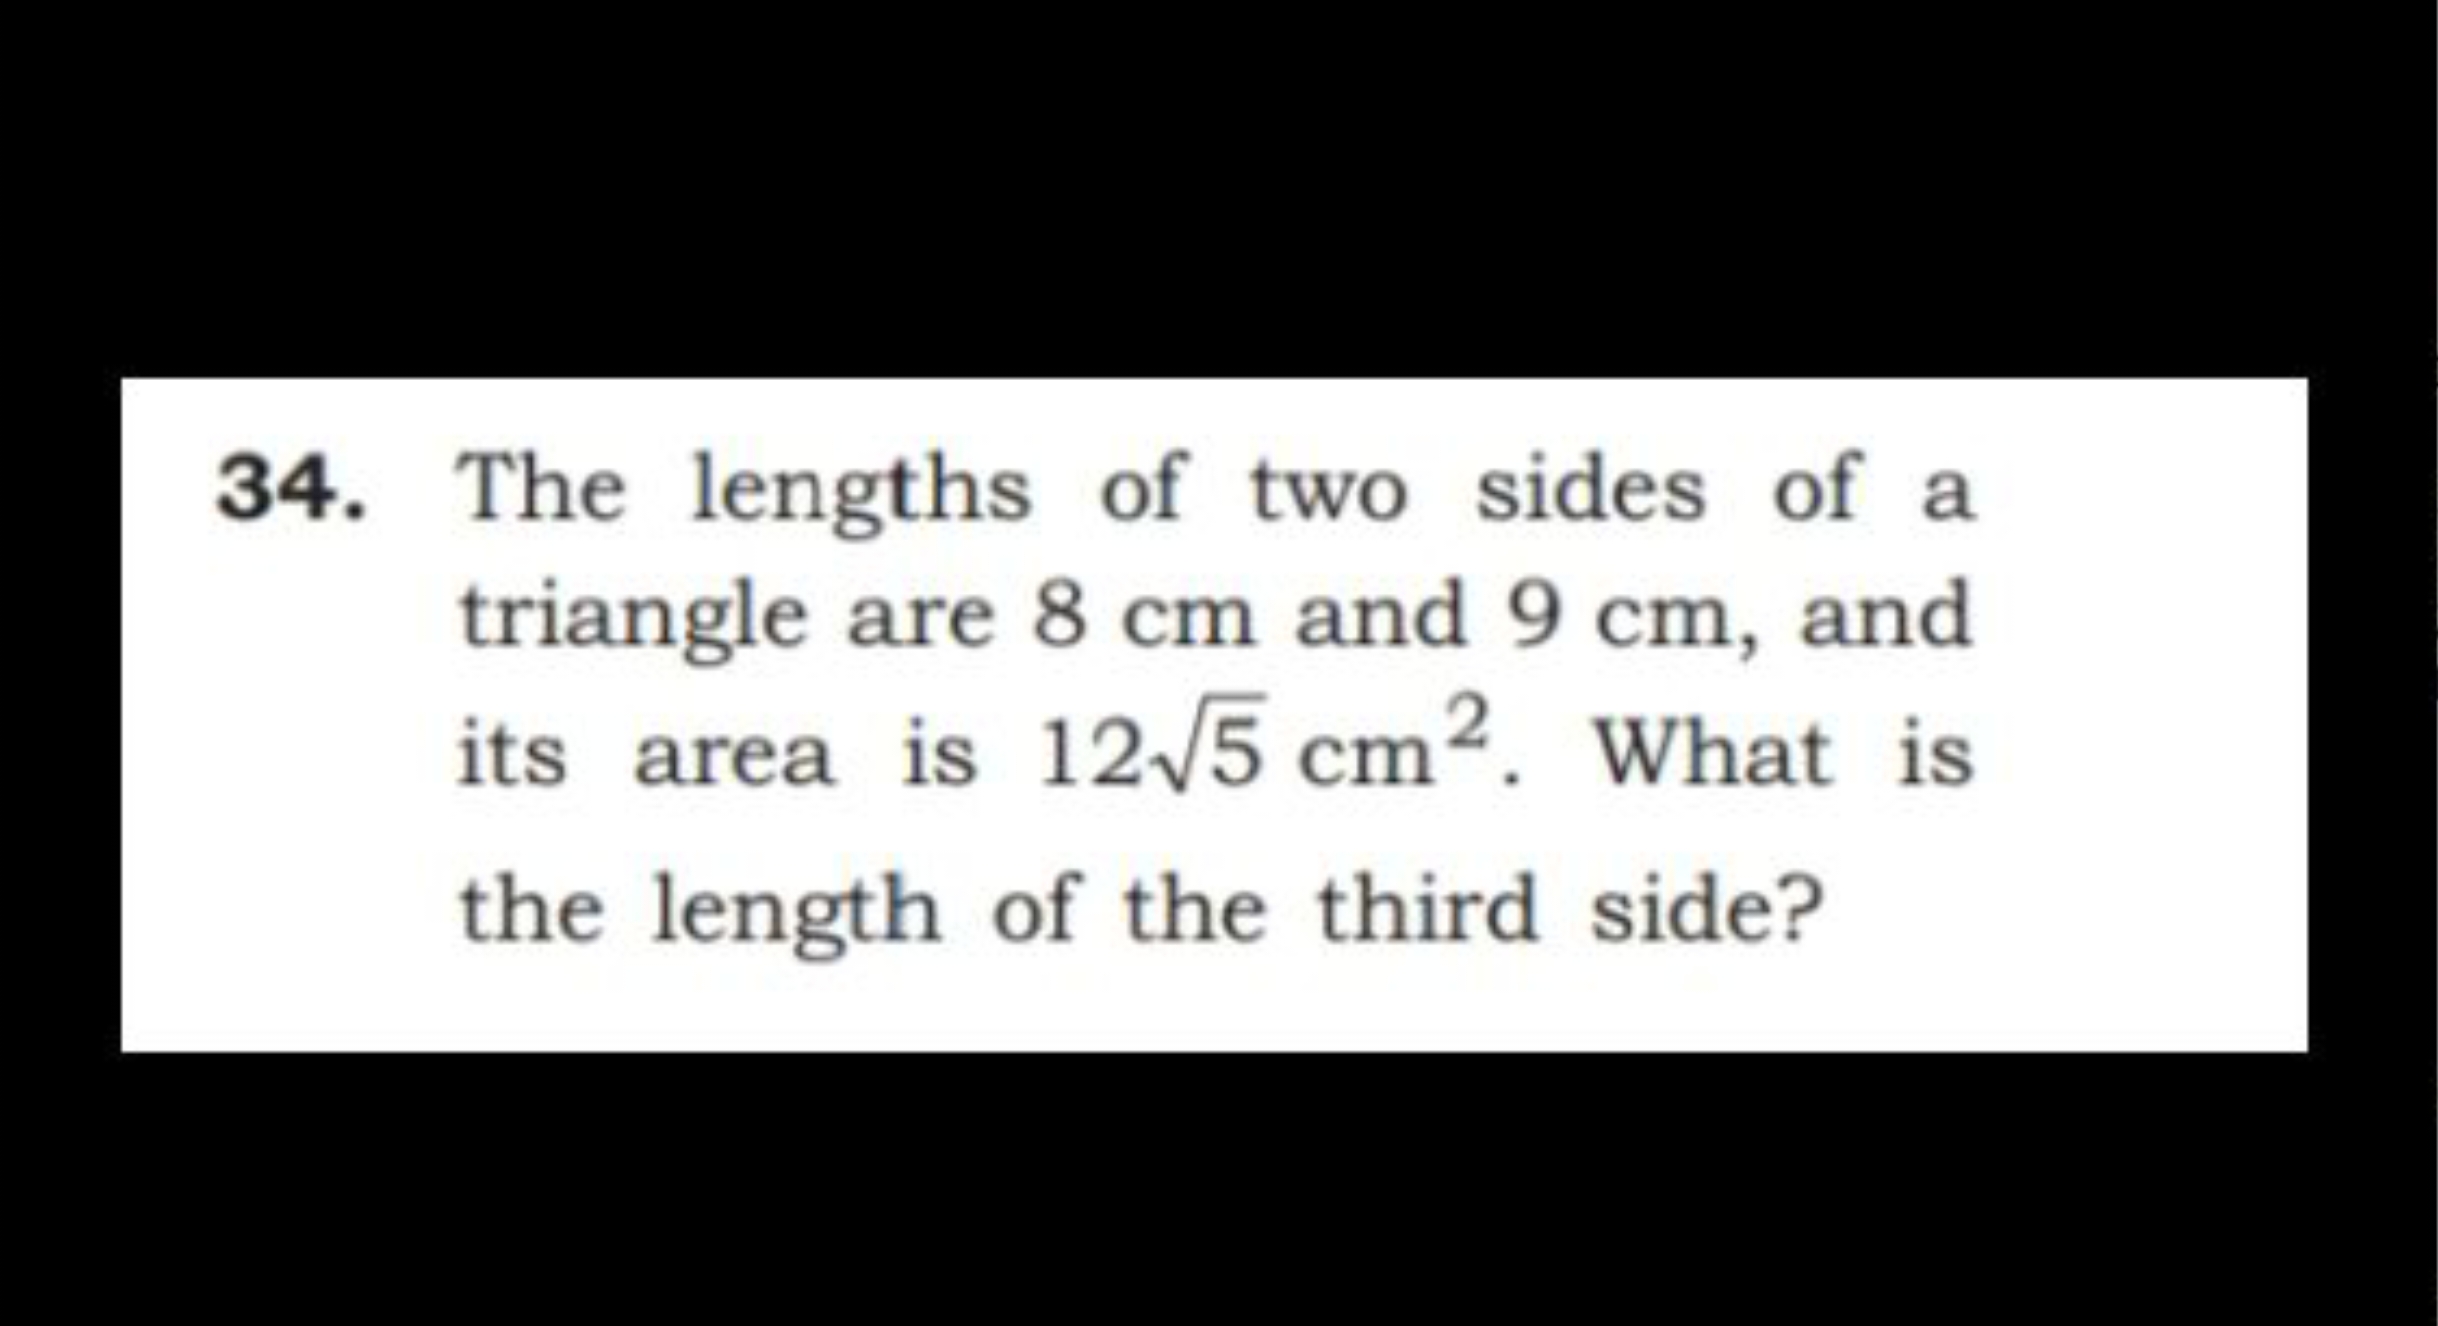 34. The lengths of two sides of a triangle are 8 cm and 9 cm, and its 